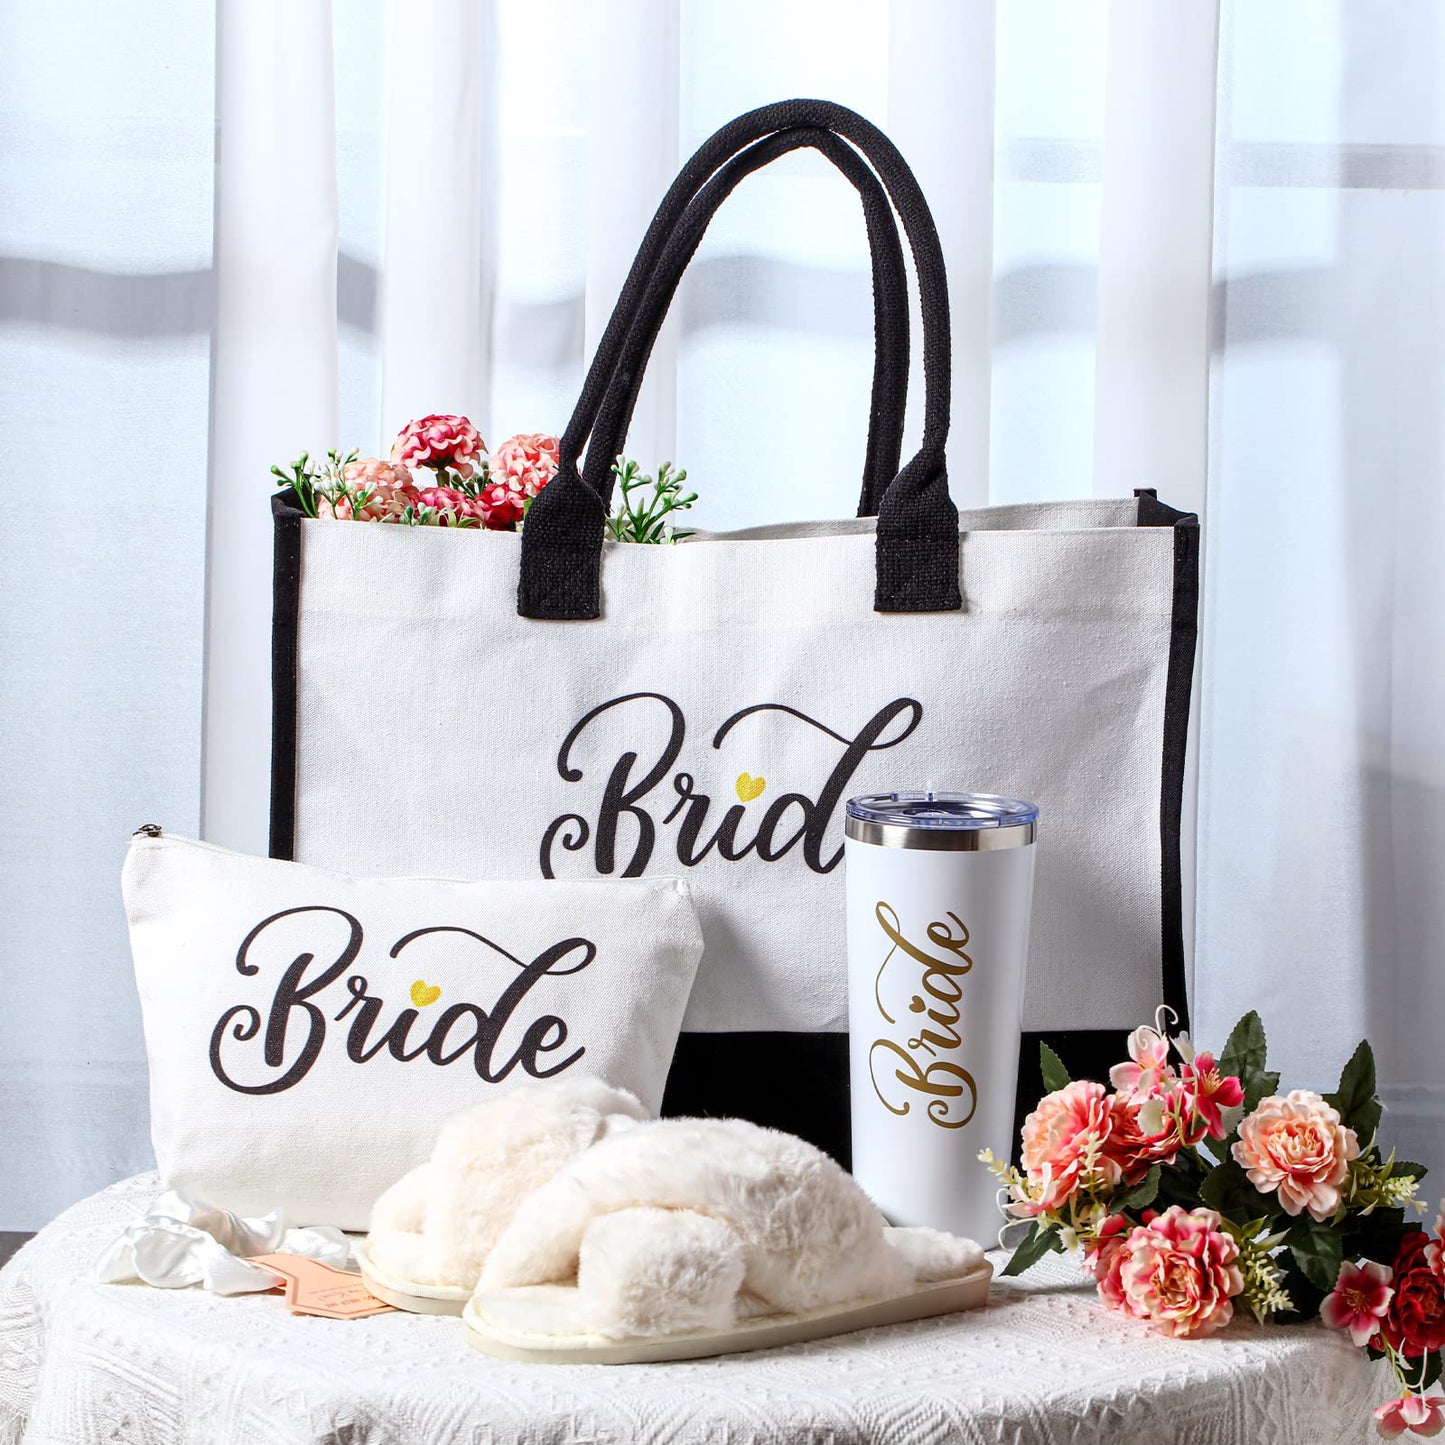 LEIFIDE Bride Tote Bag Bride Gifts Set 5 Pcs Makeup Bag Bride Stainless Tumbler Cup Bride Slippers White Hair Tie Slippers for Bridal Shower Bachelorette Party Wedding Day Gifts for Bride (Classic)